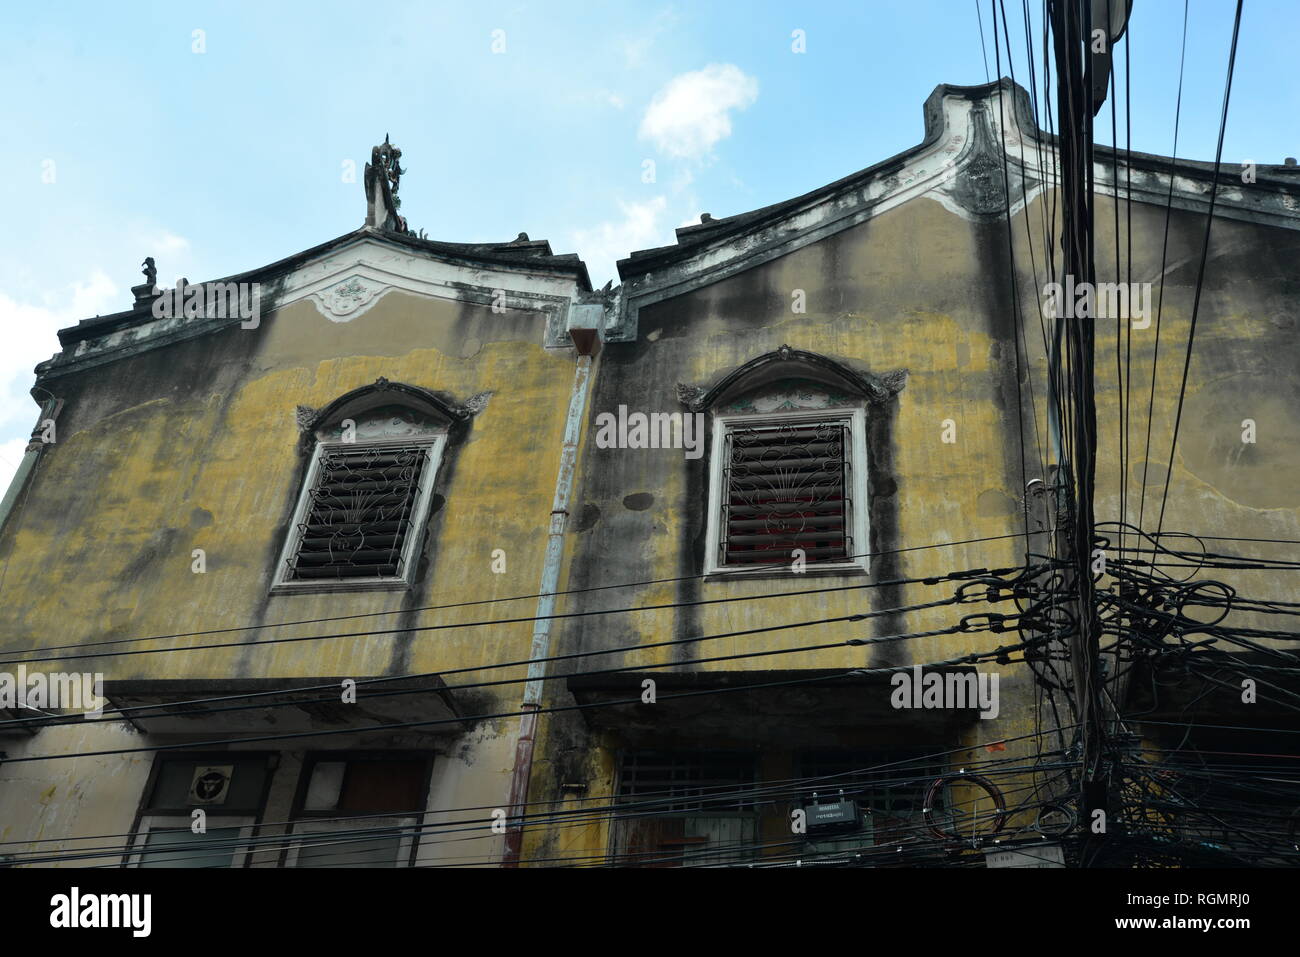 Decaying facade of an ornate structure, pasakdek Stock Photo